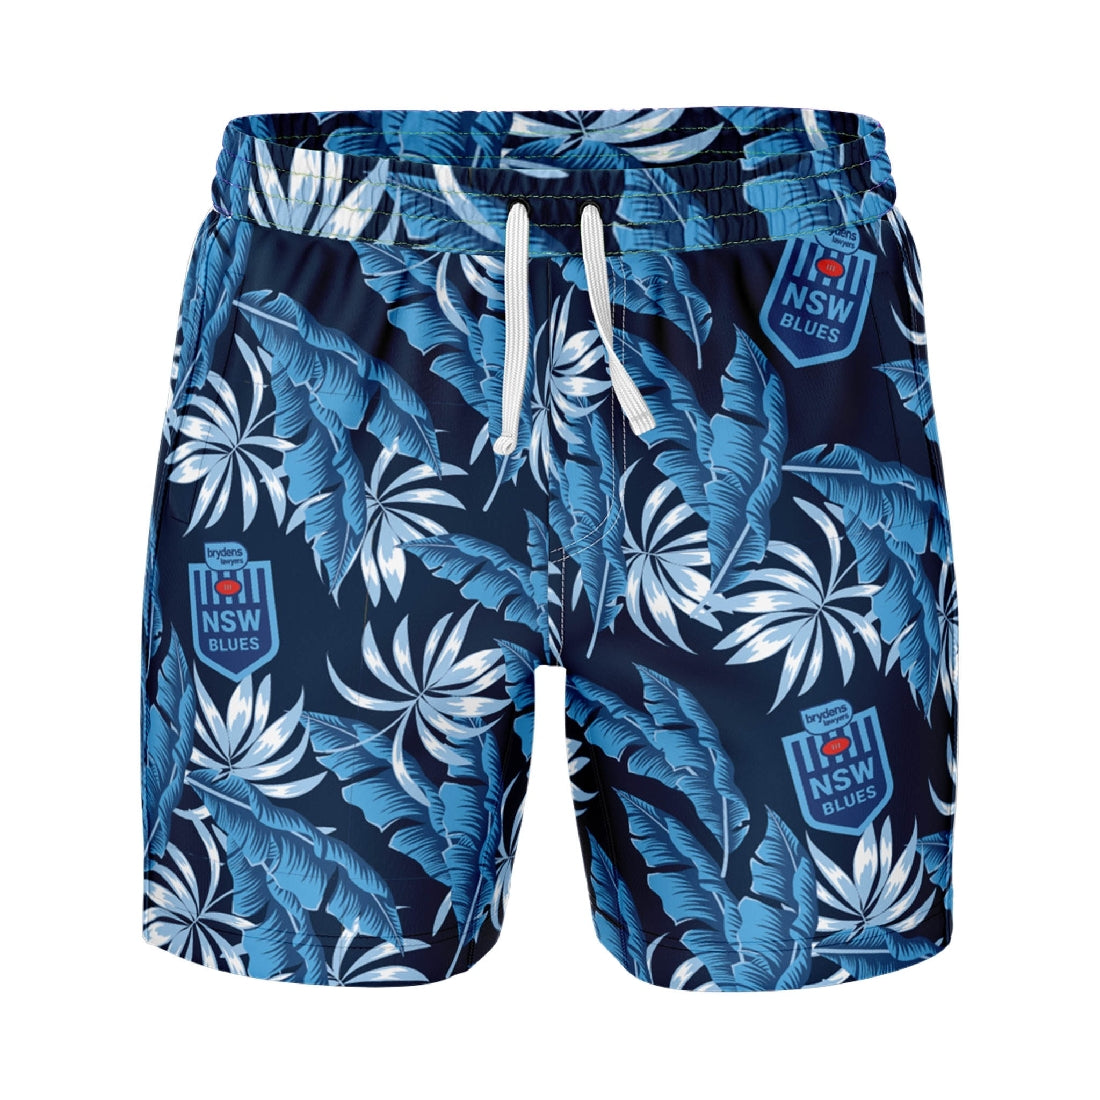 NSW Blues Volley Shorts